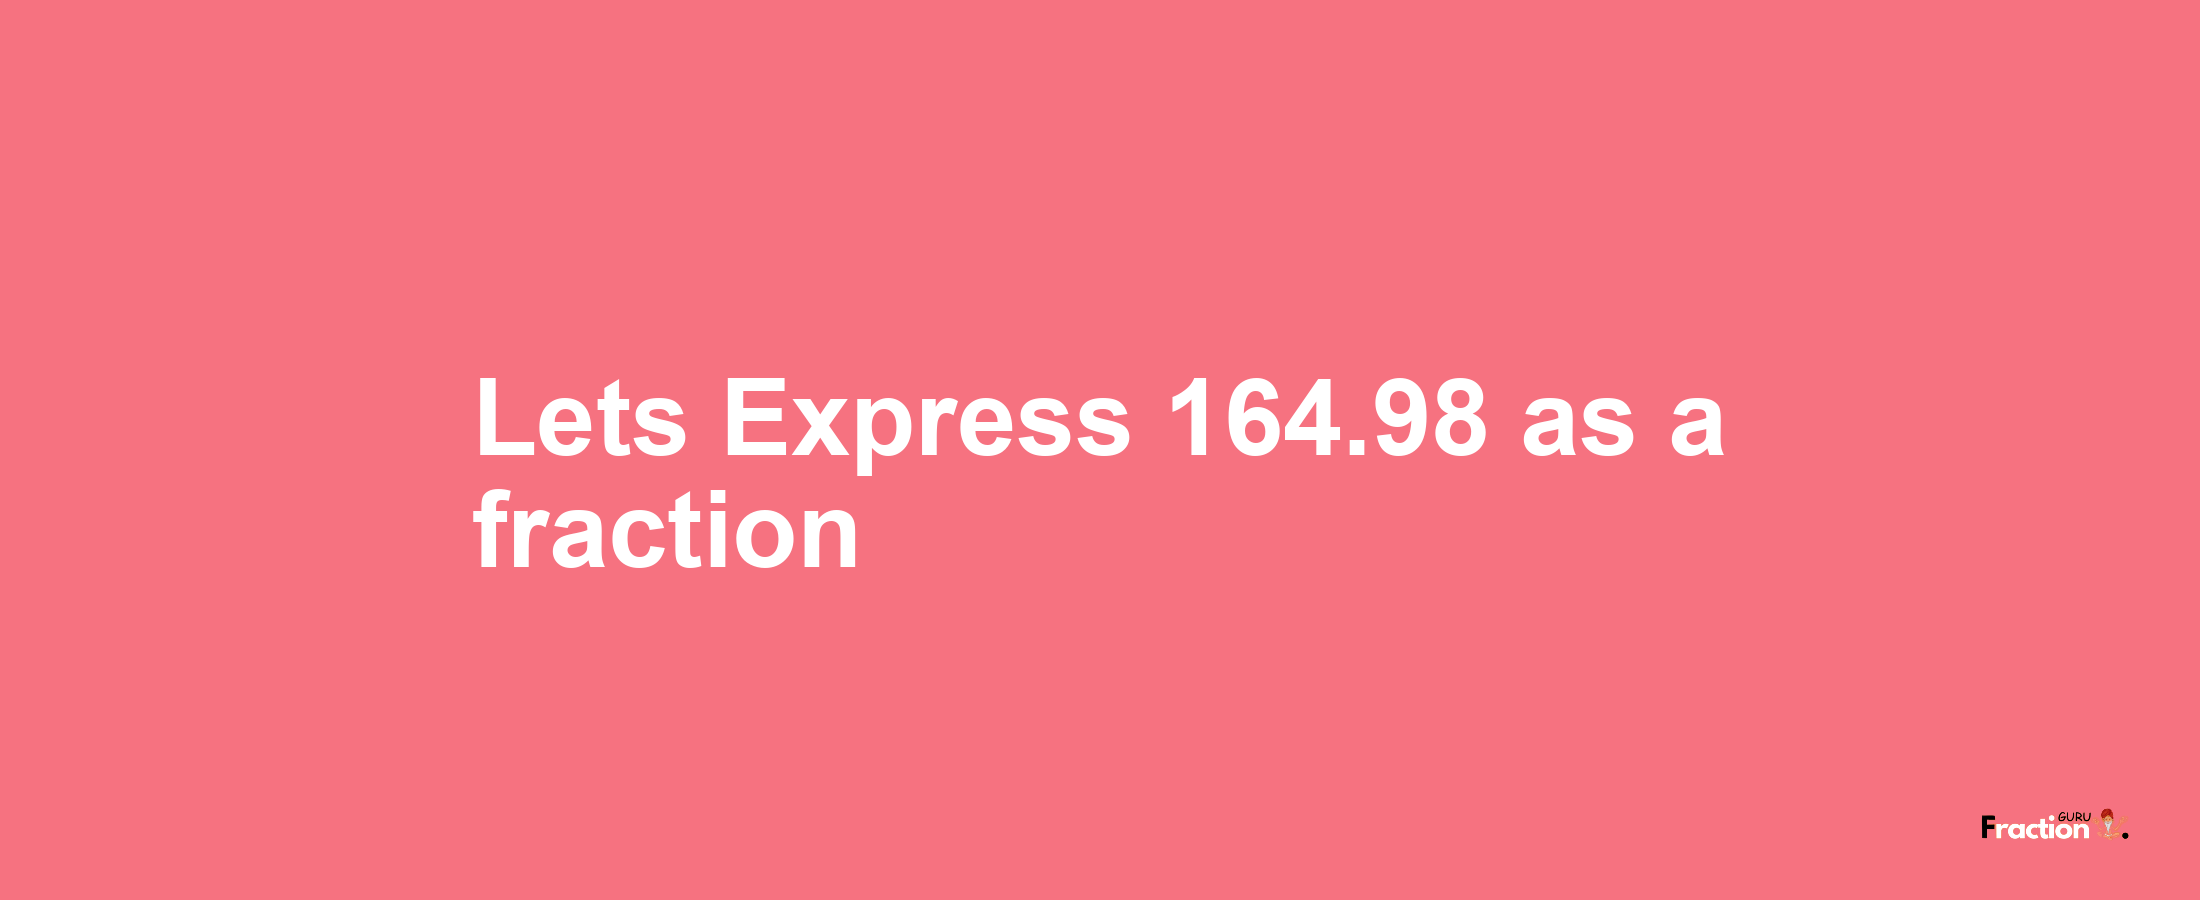 Lets Express 164.98 as afraction